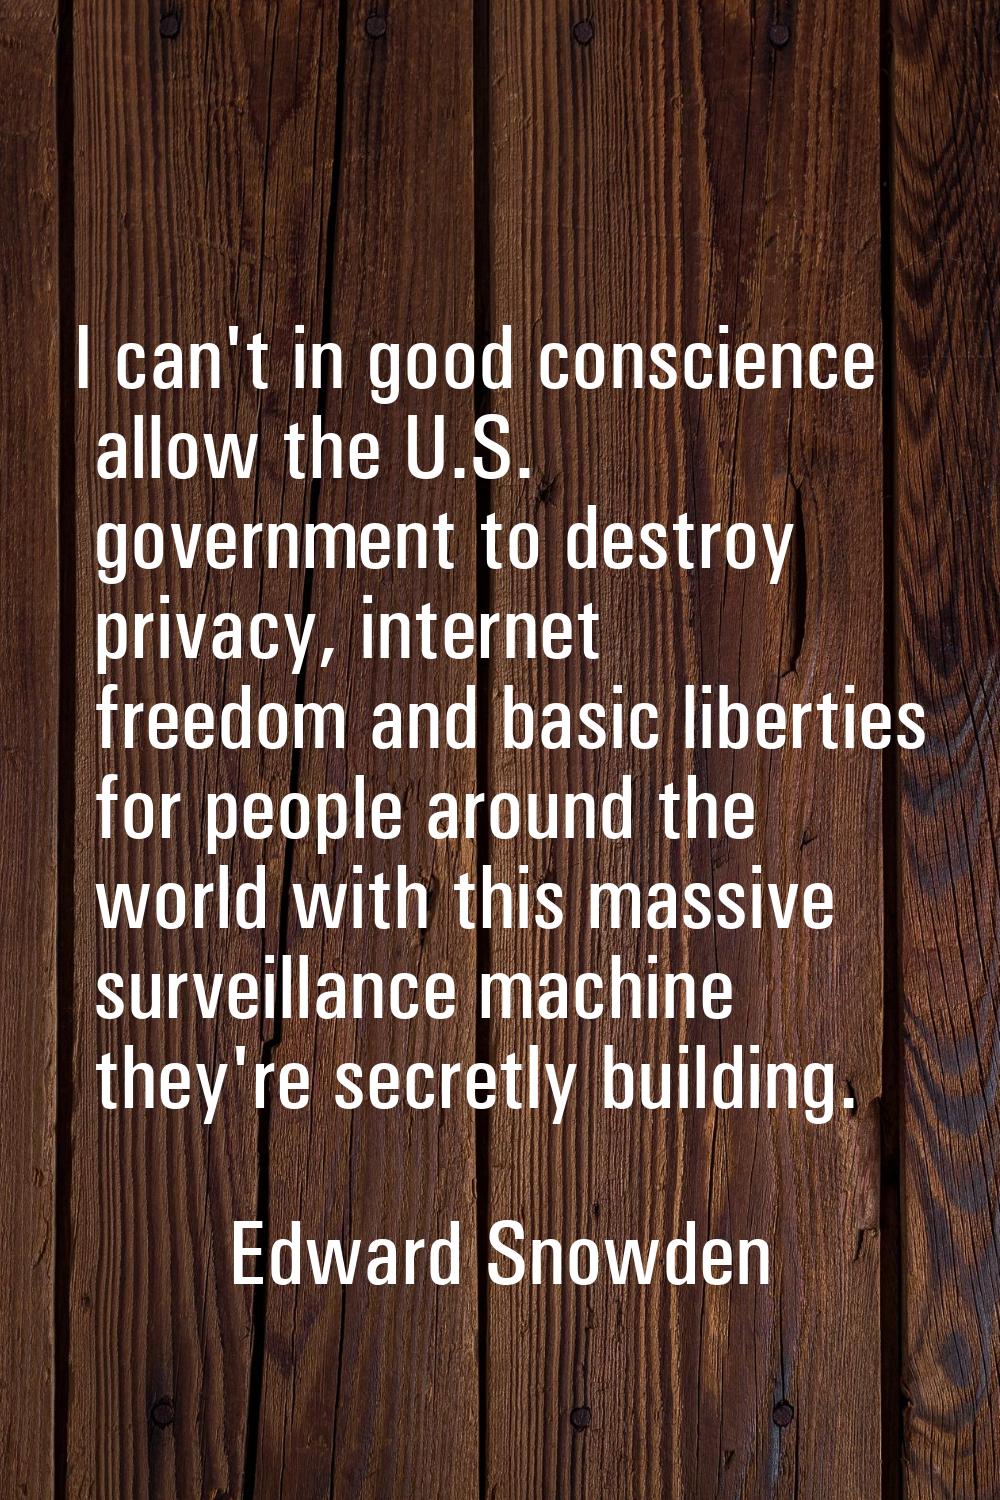 I can't in good conscience allow the U.S. government to destroy privacy, internet freedom and basic